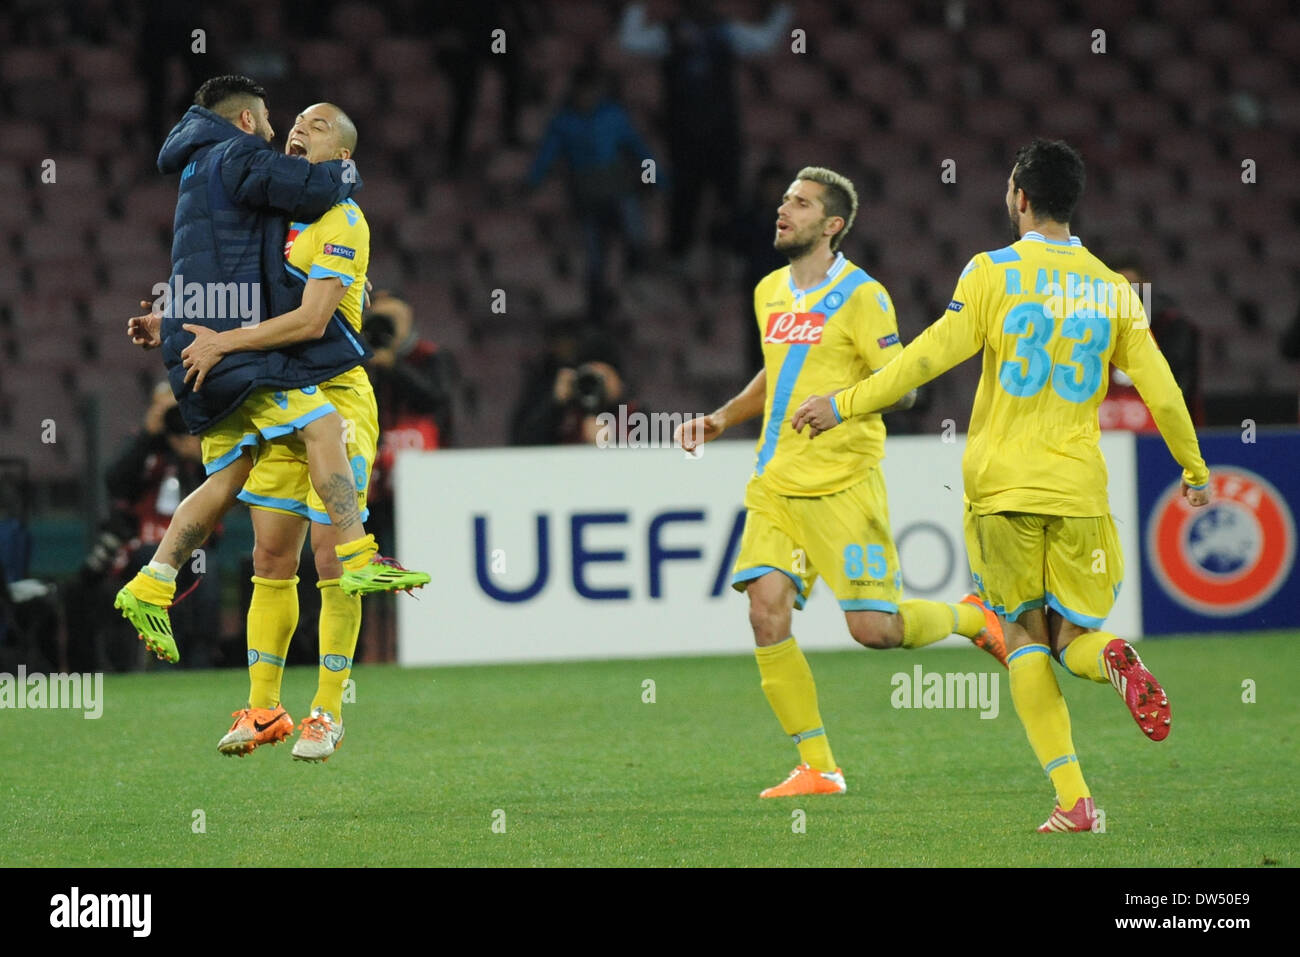 Gokhan Inler celebrates after scoring during the UEFA Europa League Round of 32 Second Leg match between SSC Napoli and Swansea City  Football / Soccer at Stadio San Paolo on February 27, 2014 in Naples, Italy. (Photo Franco Romano) Stock Photo